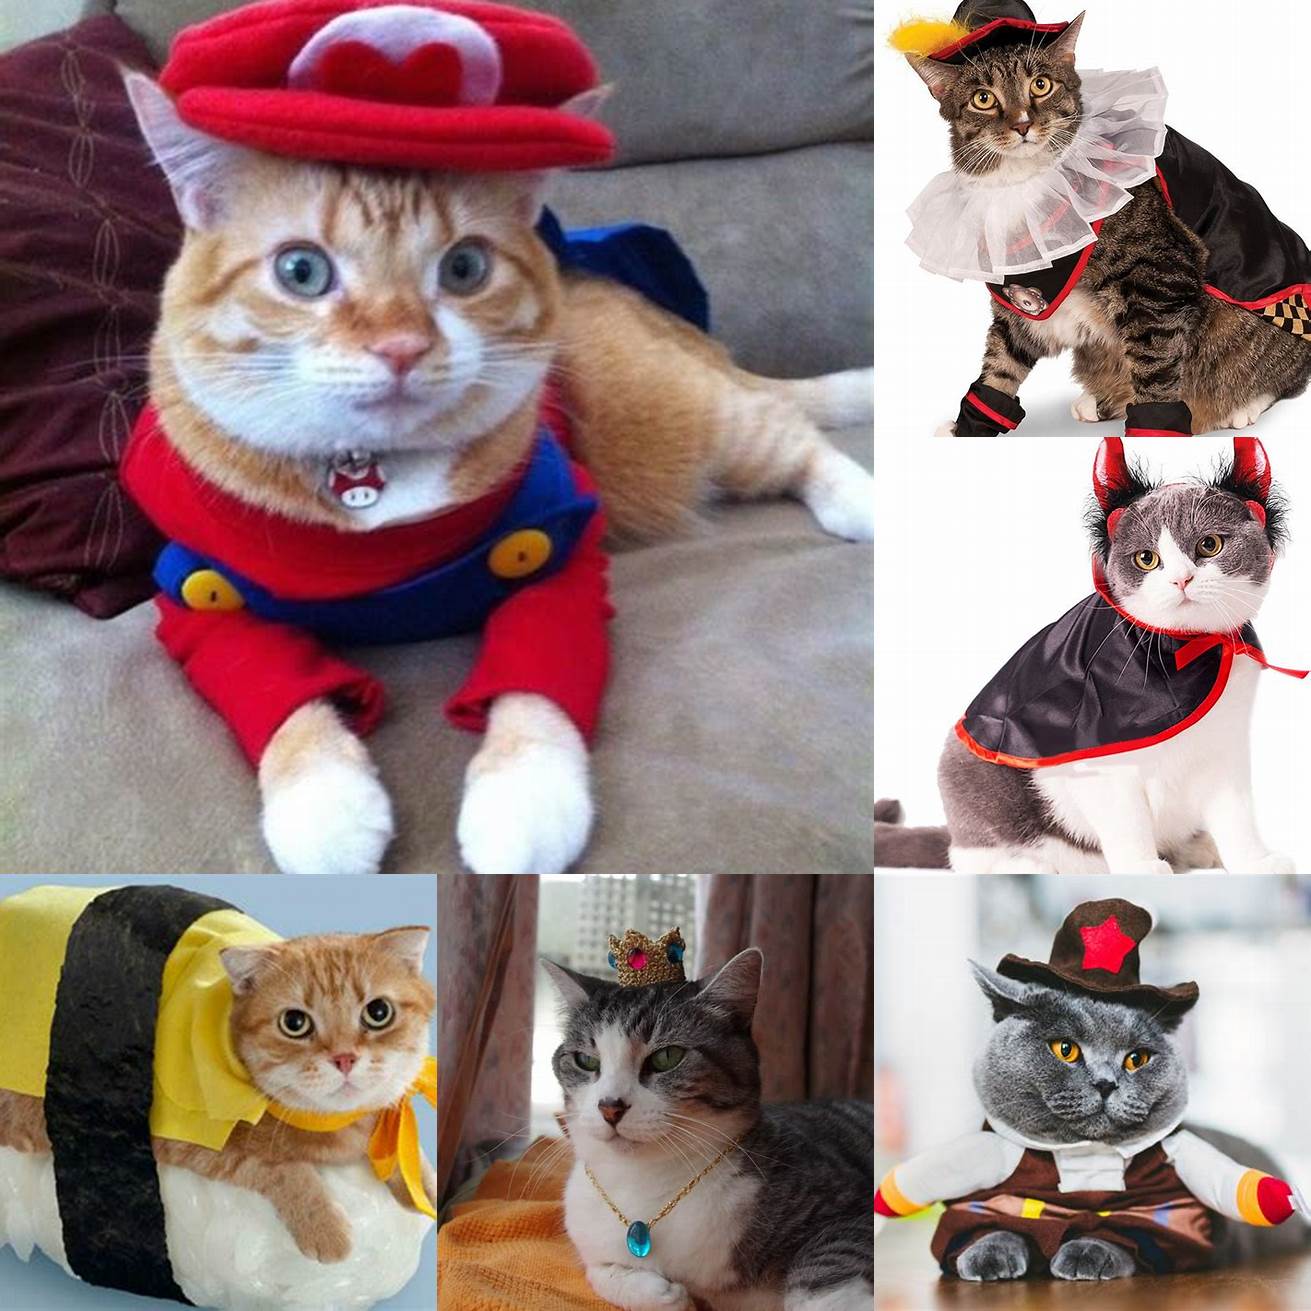 Cats in costumes